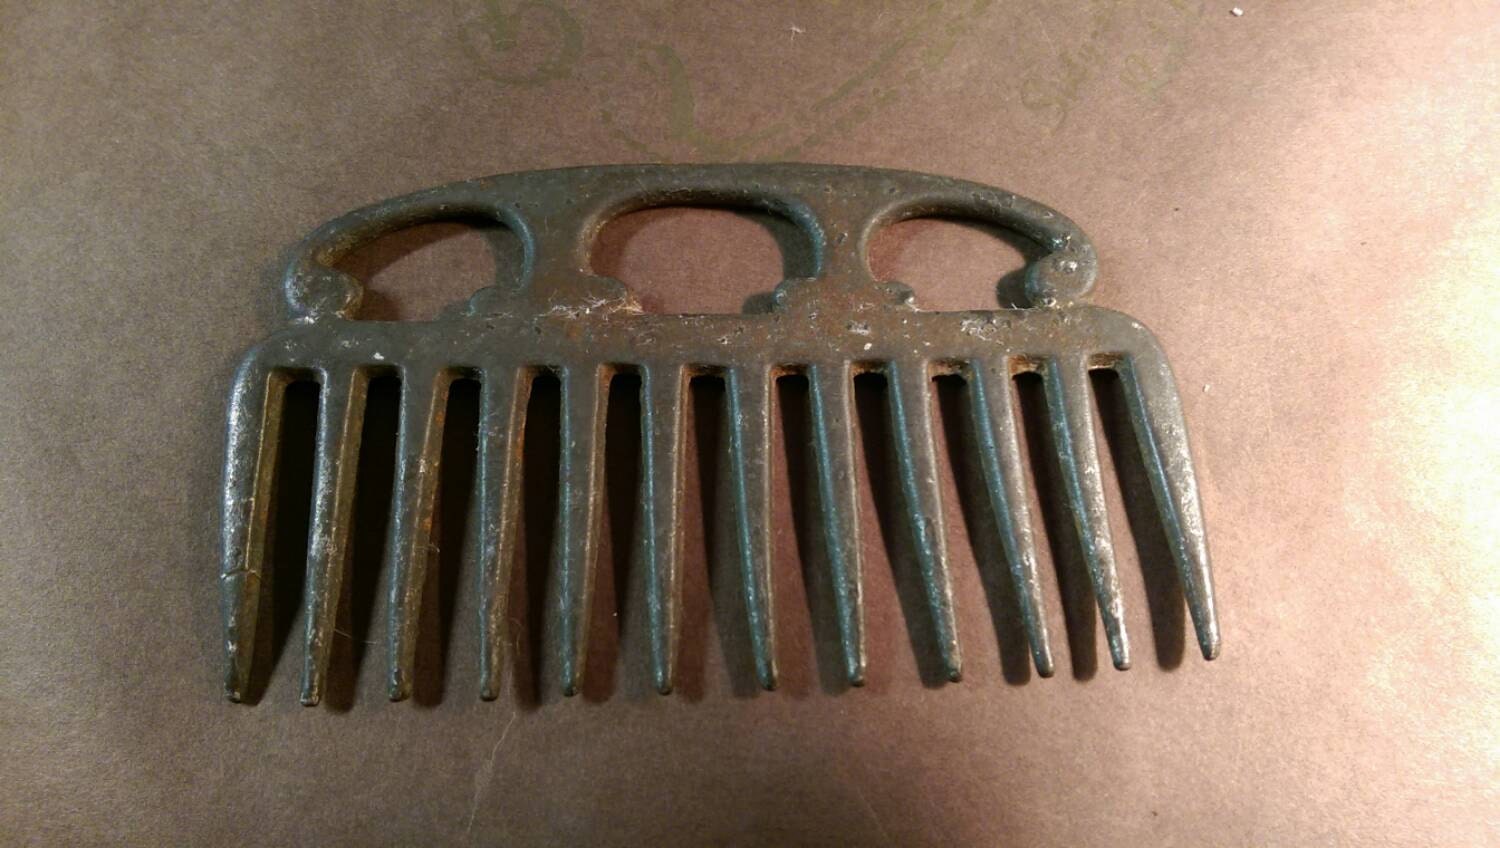 Hand Forged Antique Iron Comb by AntiquesRevived on Etsy